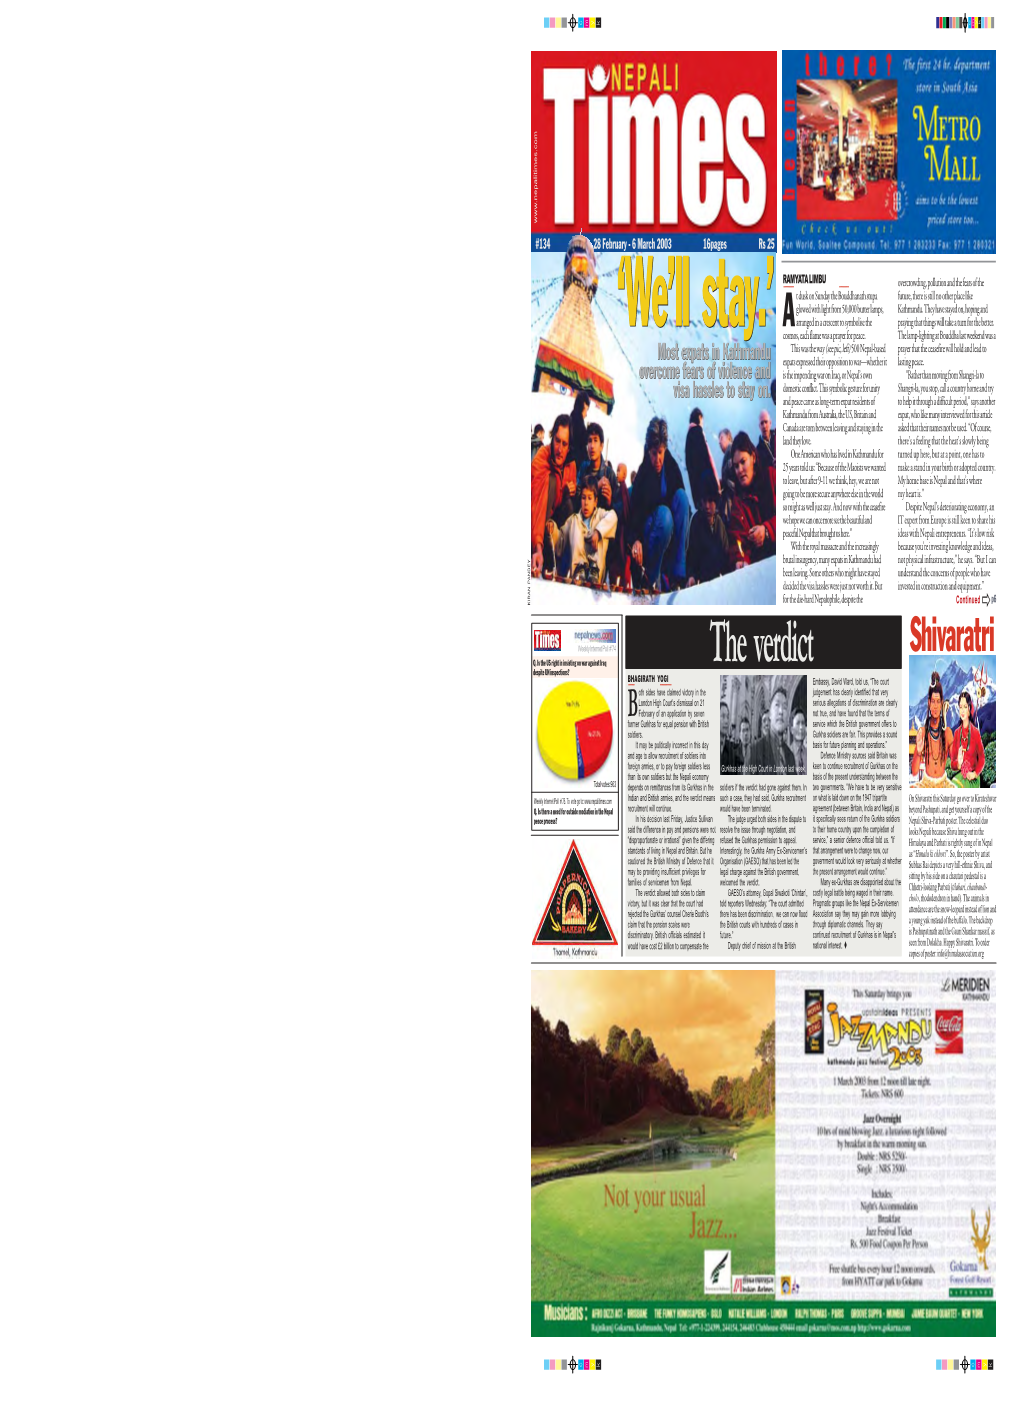 Nepali Times Is Published by Himalmedia Pvt Ltd, of $500 a Month on Intelligentsia